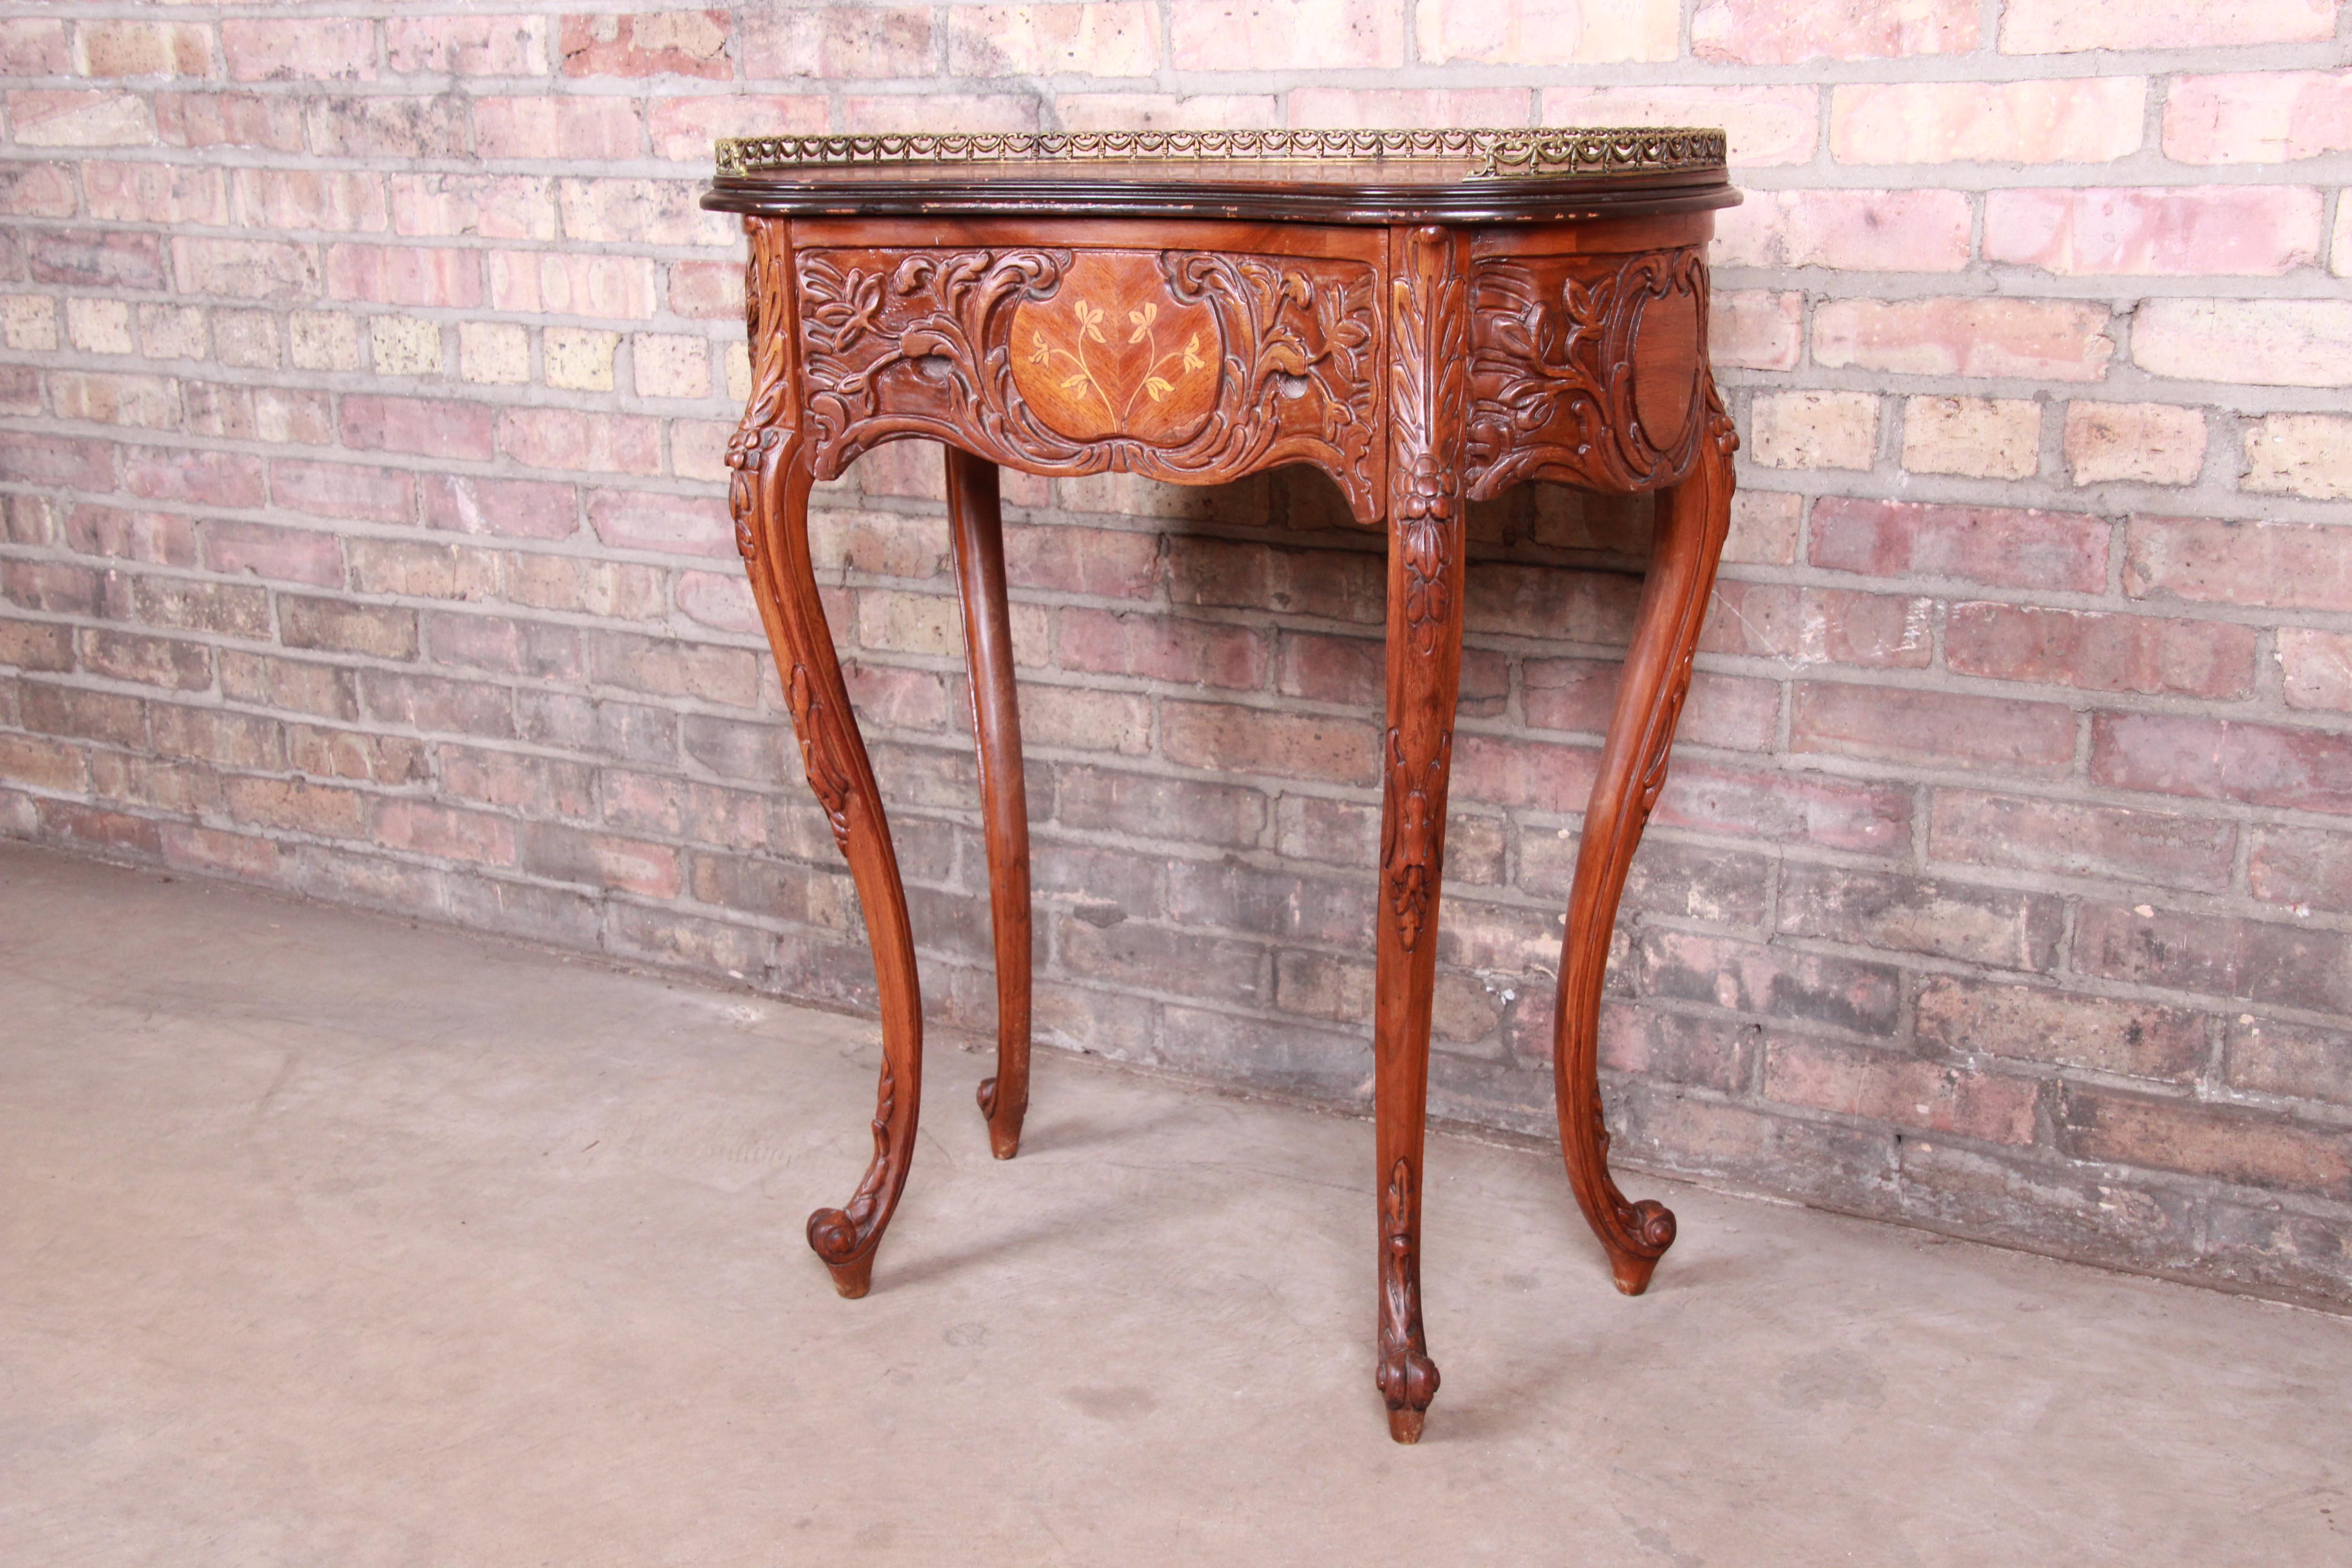 20th Century French Provincial Louis XV Inlaid Mahogany Kidney Shape Nightstand or Side Table